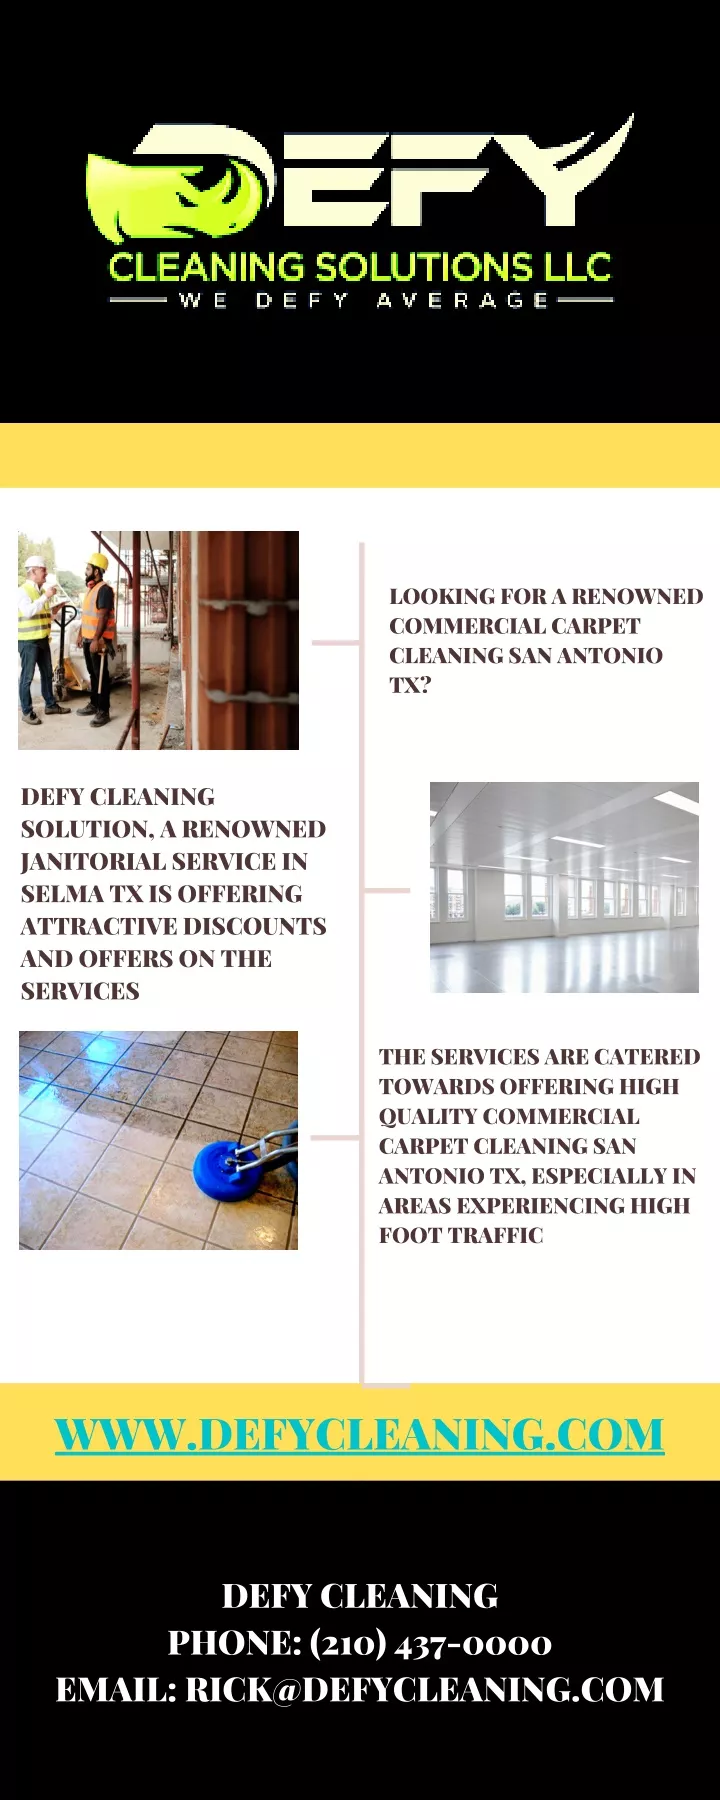 looking for a renowned commercial carpet cleaning